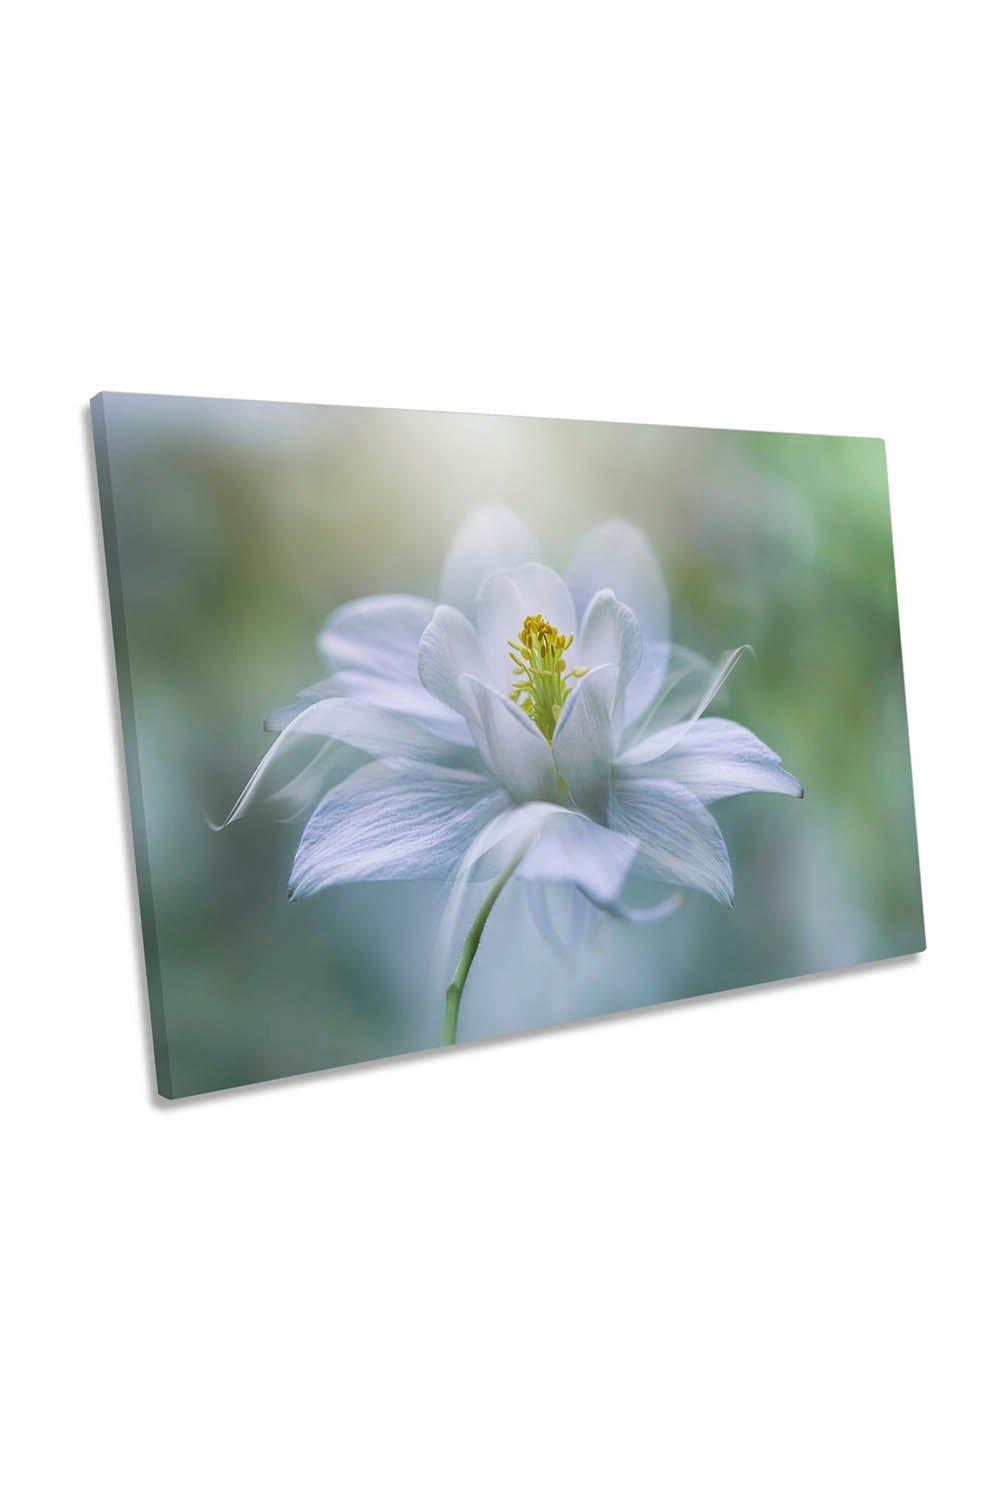 Purity White Flower Floral Canvas Wall Art Picture Print